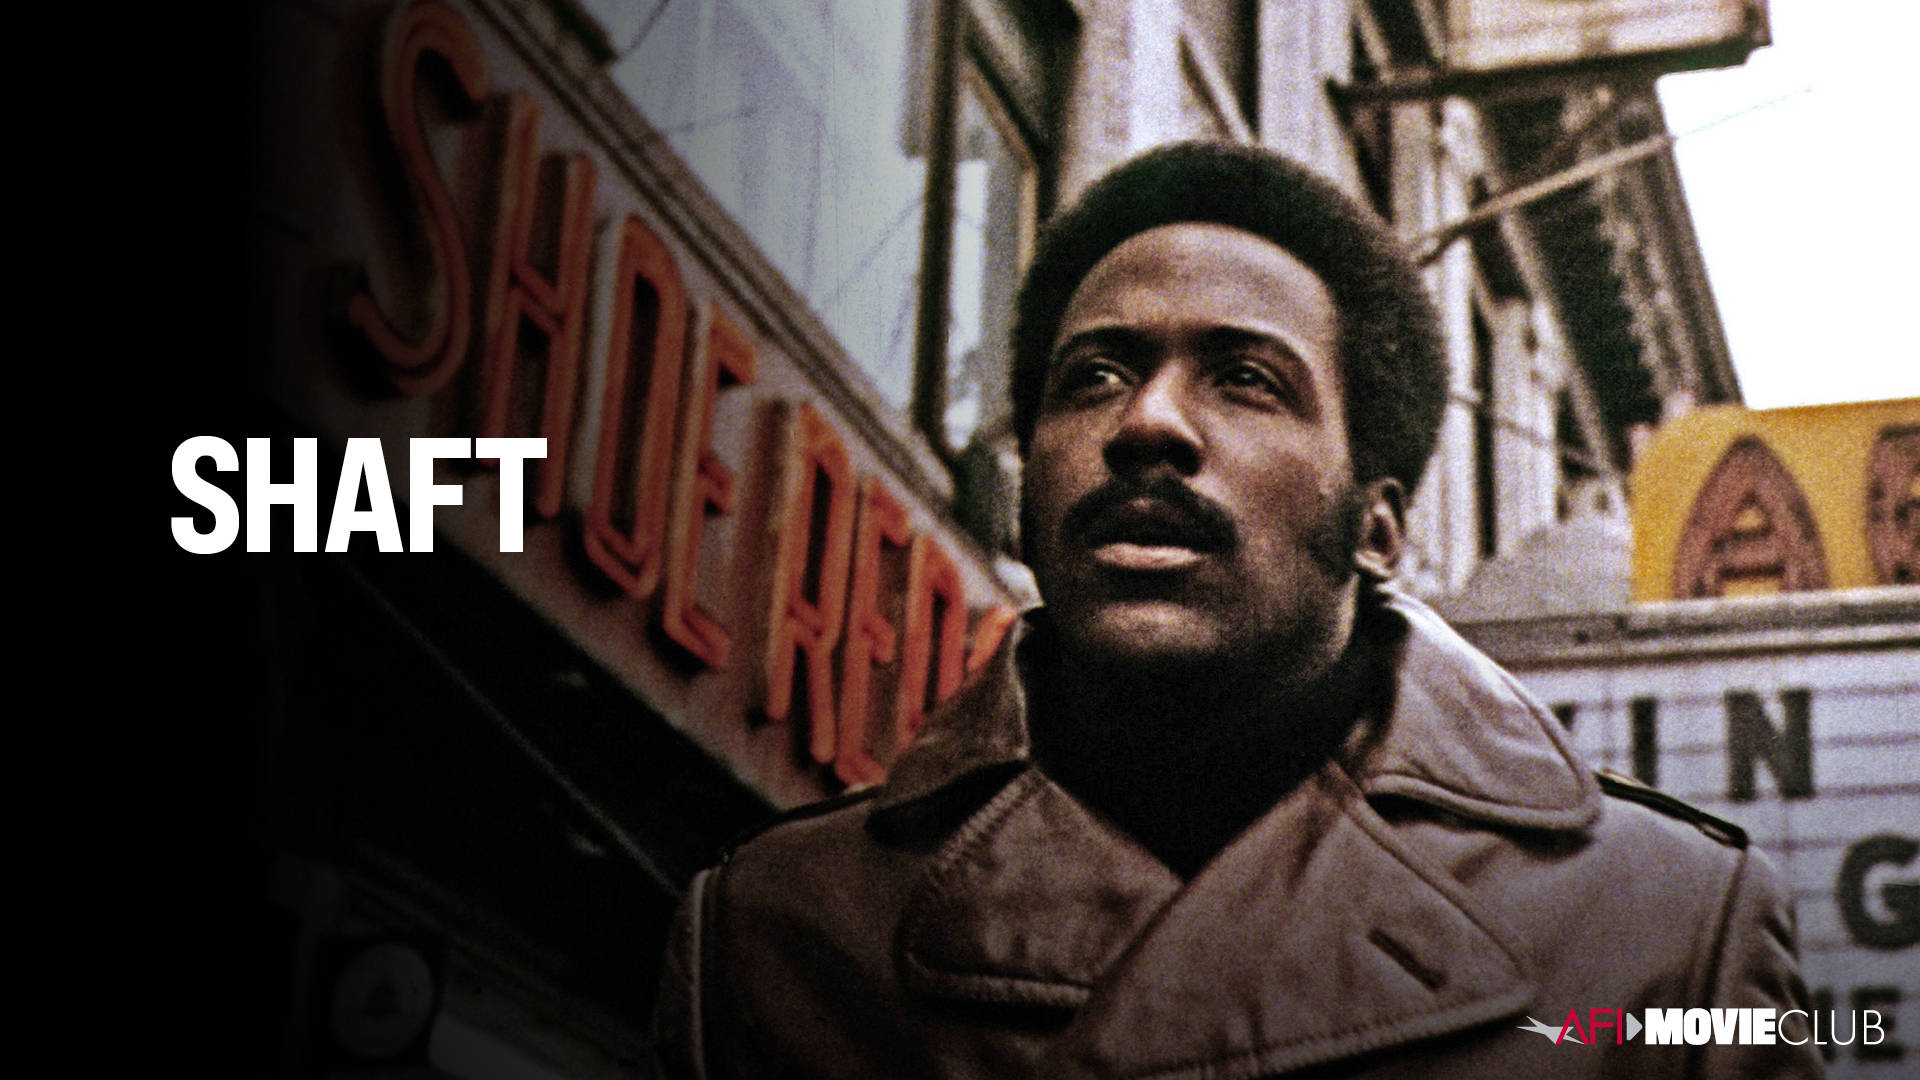 Shaft Movie Cover Featuring Richard Roundtree Wallpaper